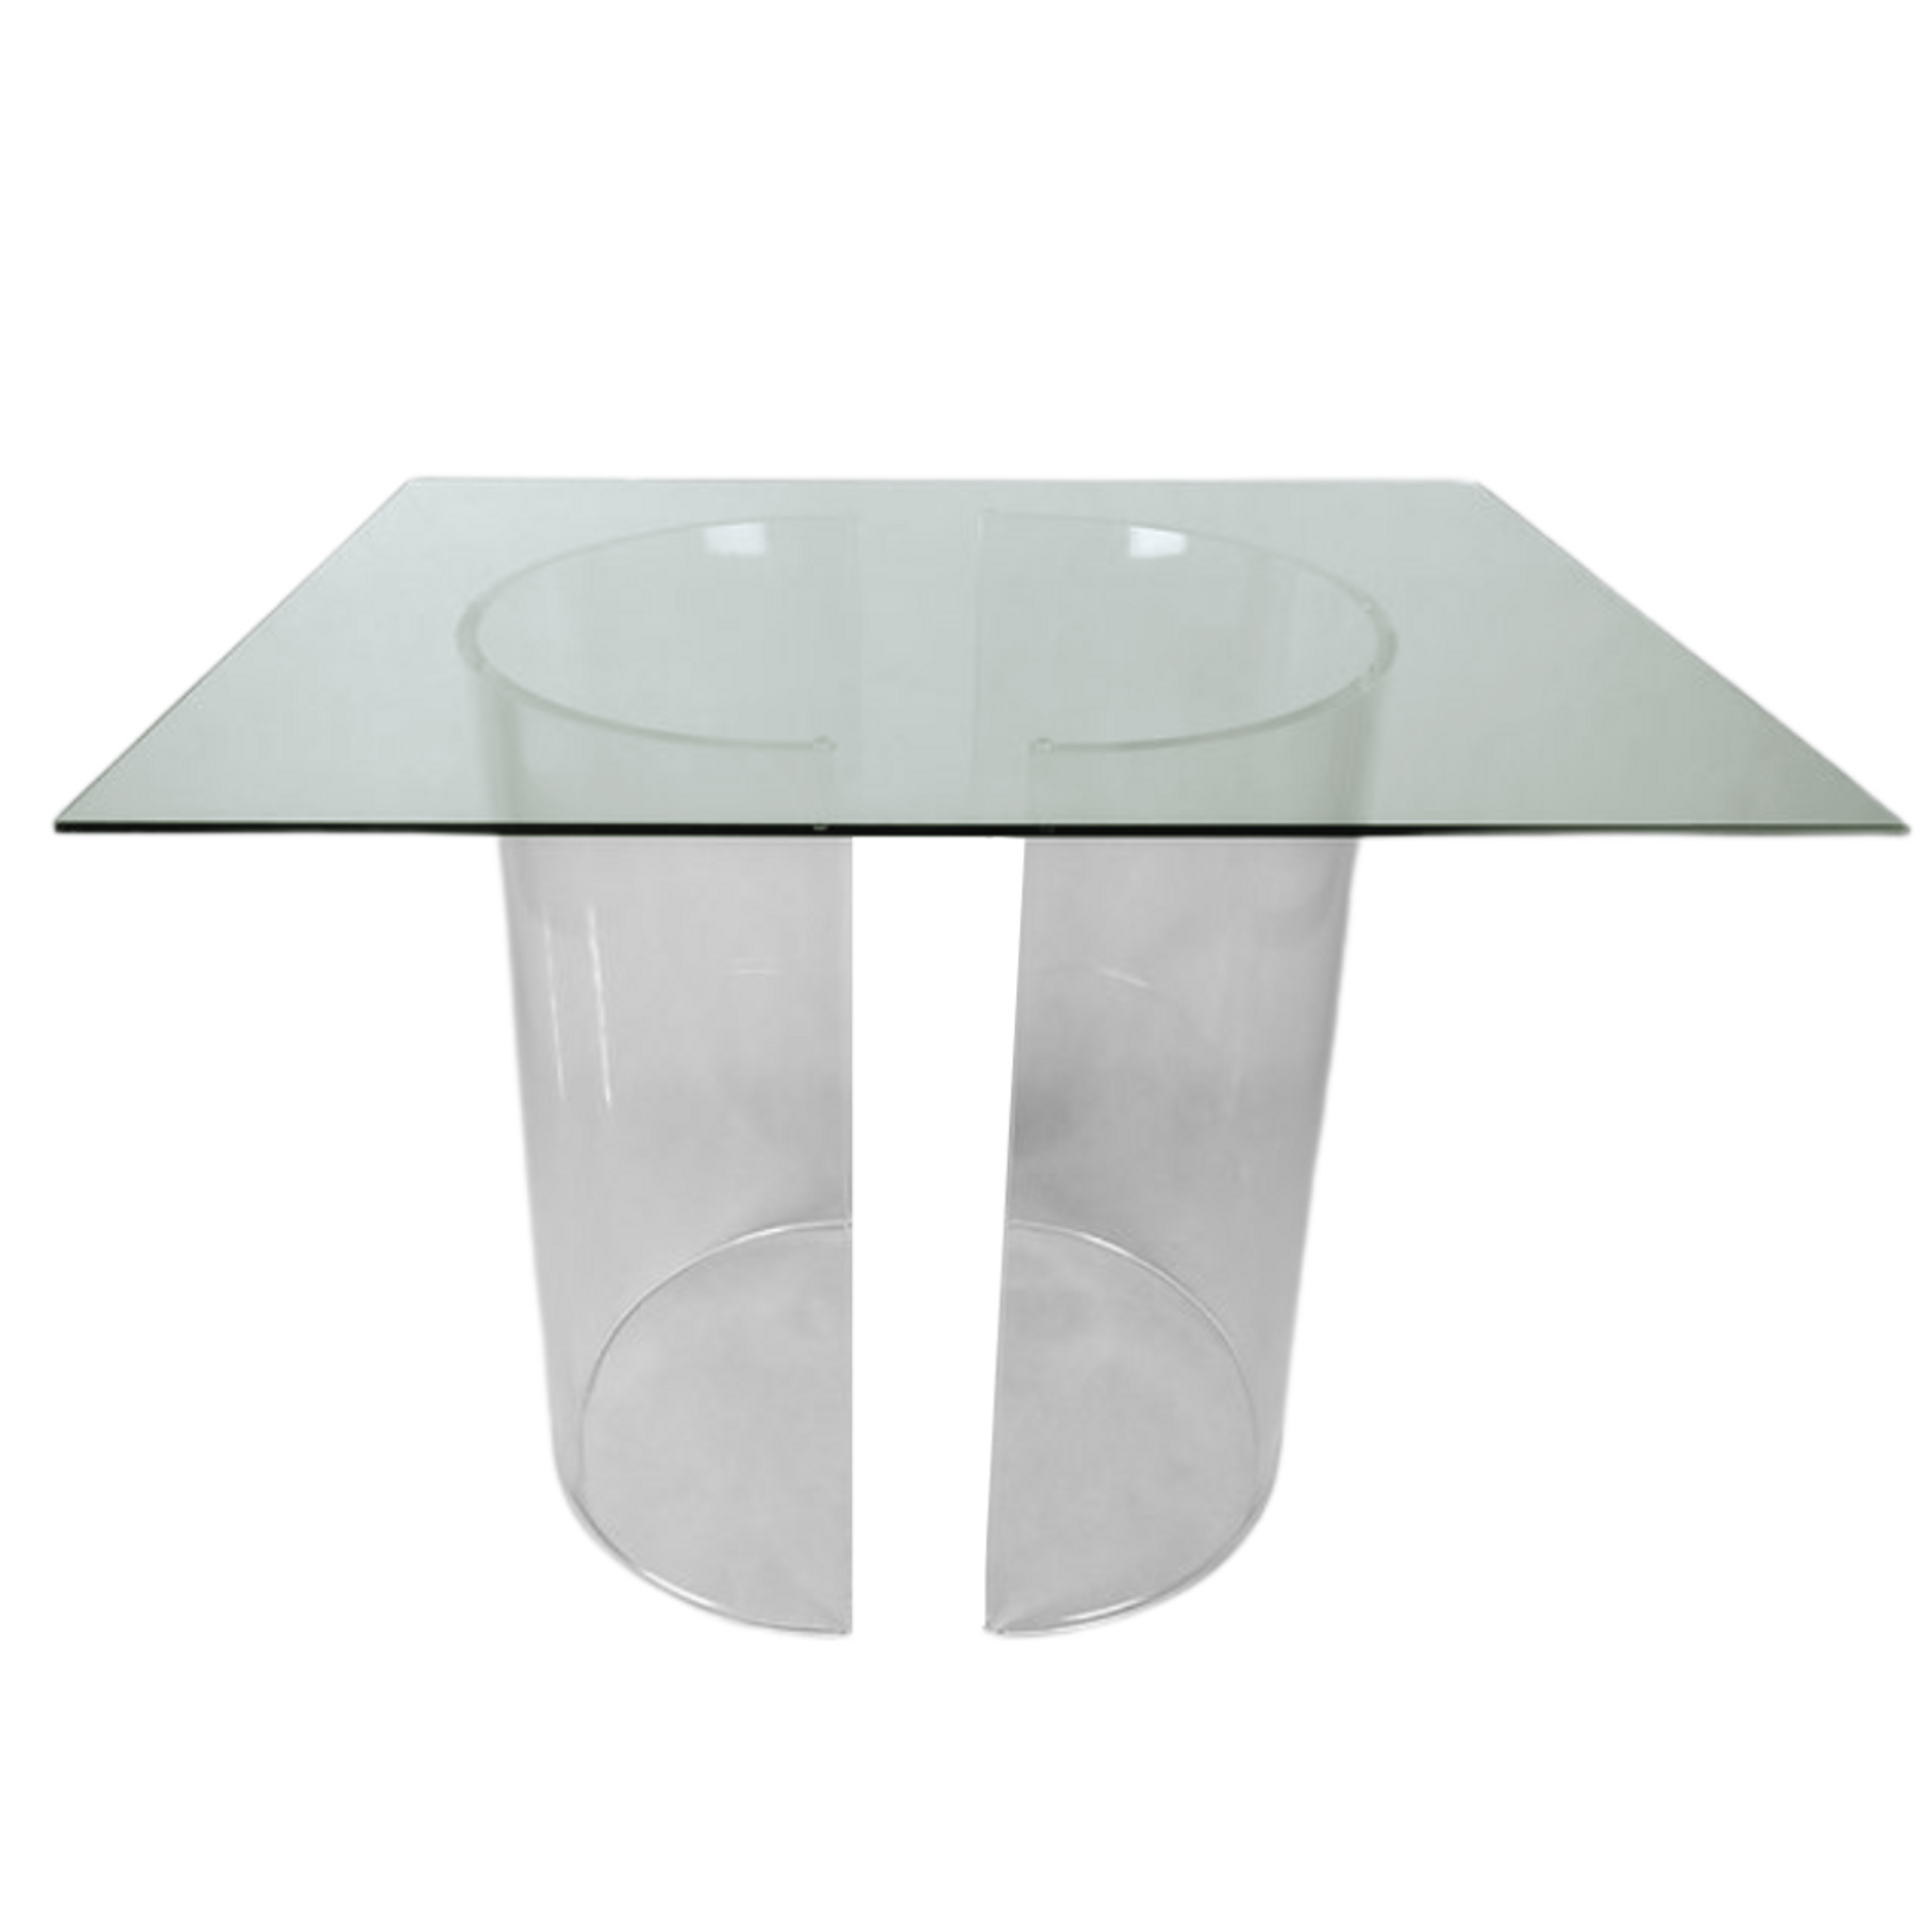 square Table with Half Circle Legs